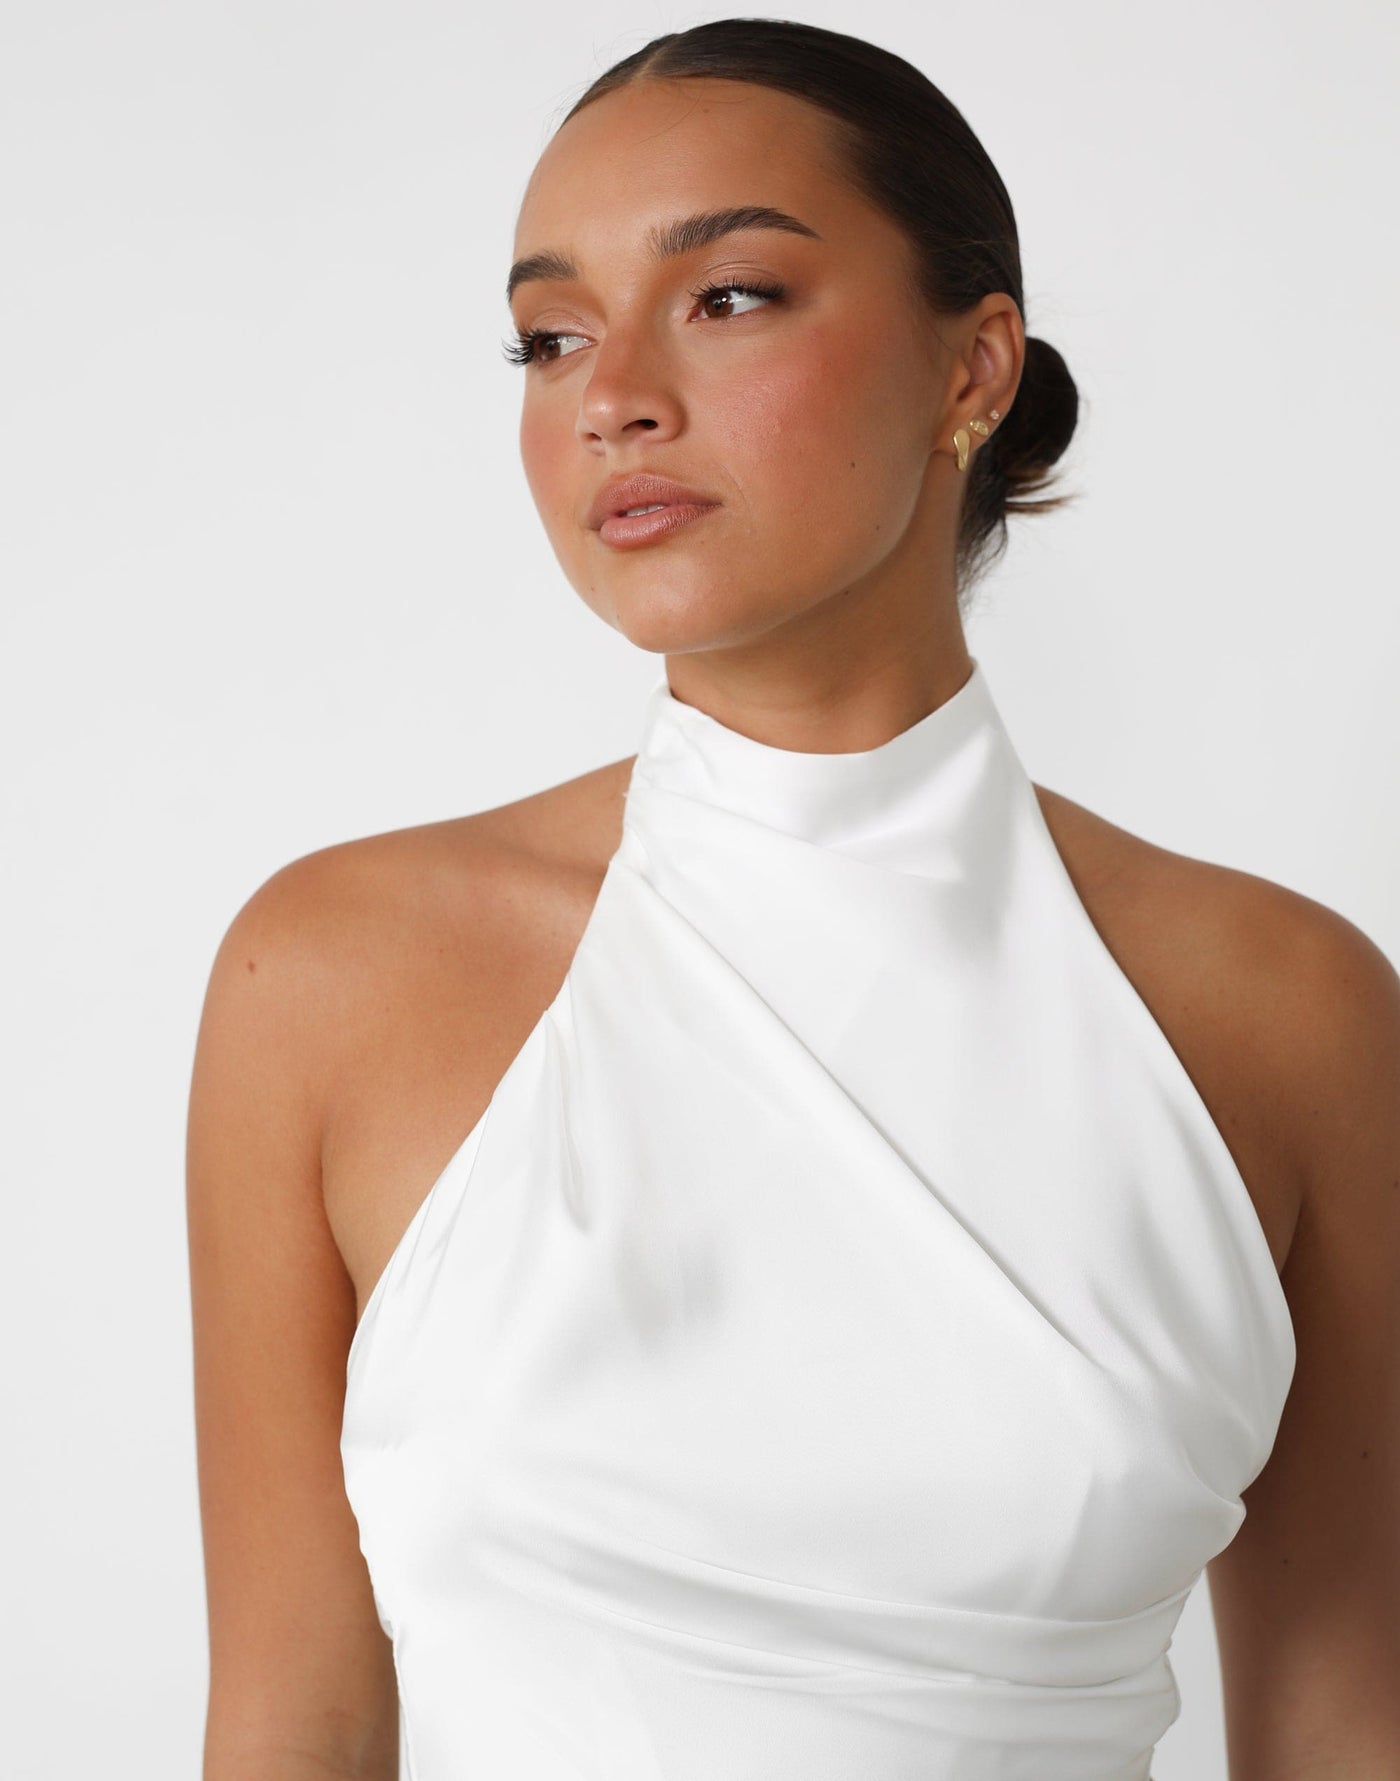 Tinashe Top (White) - High Neck Satin Tie Up Back Top - Women's Top - Charcoal Clothing